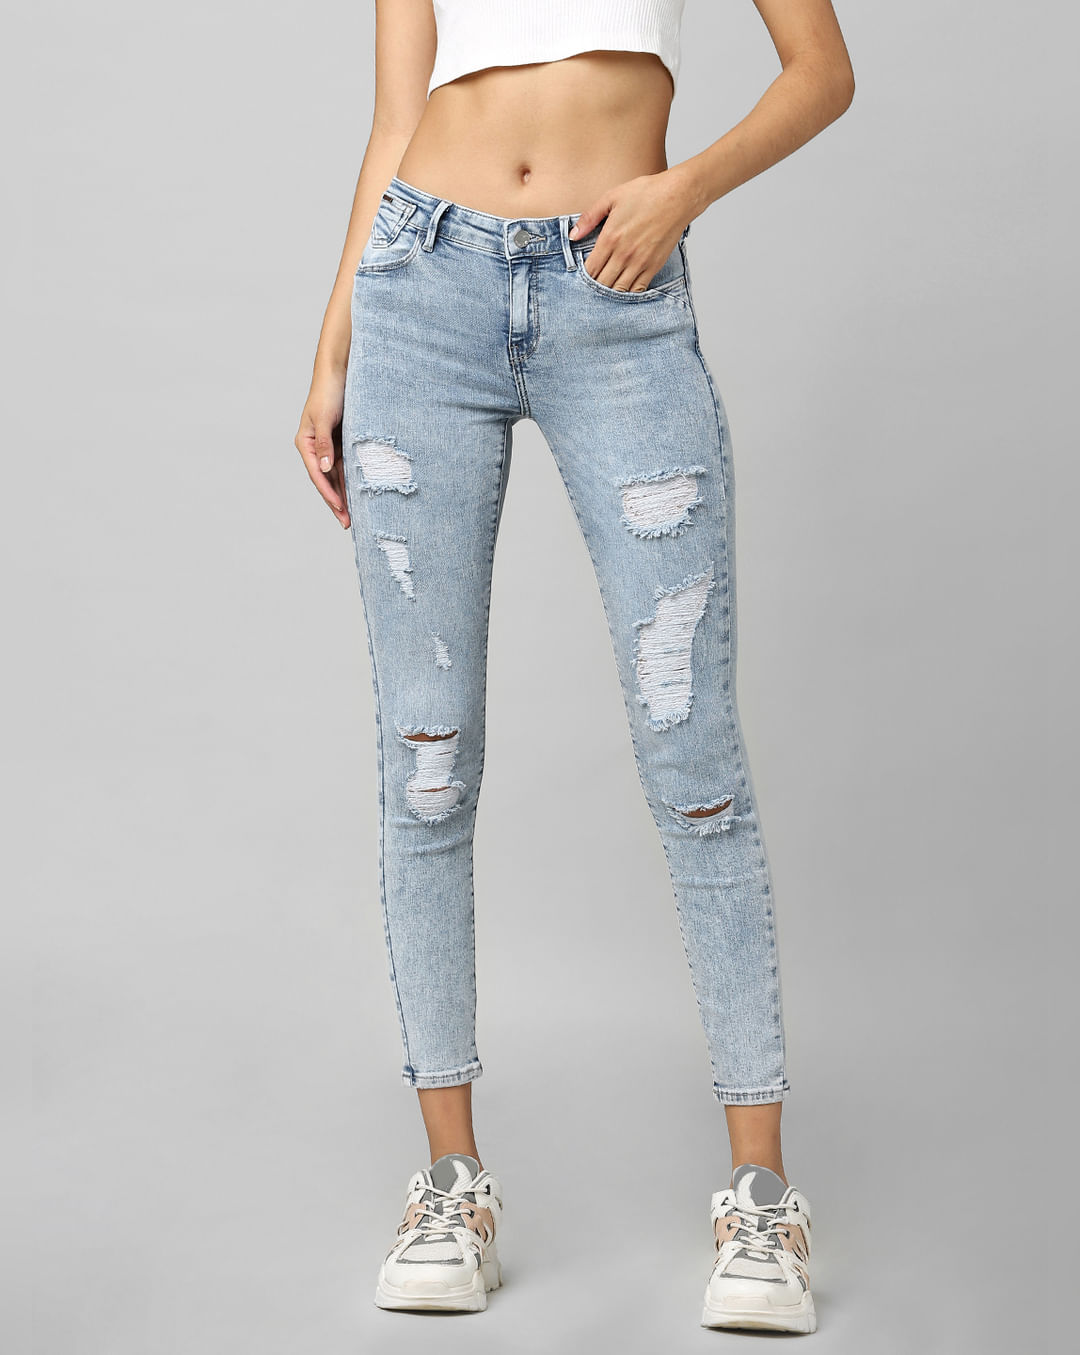 Buy Blue Mid Rise Distressed Skinny Jeans For Women - ONLY